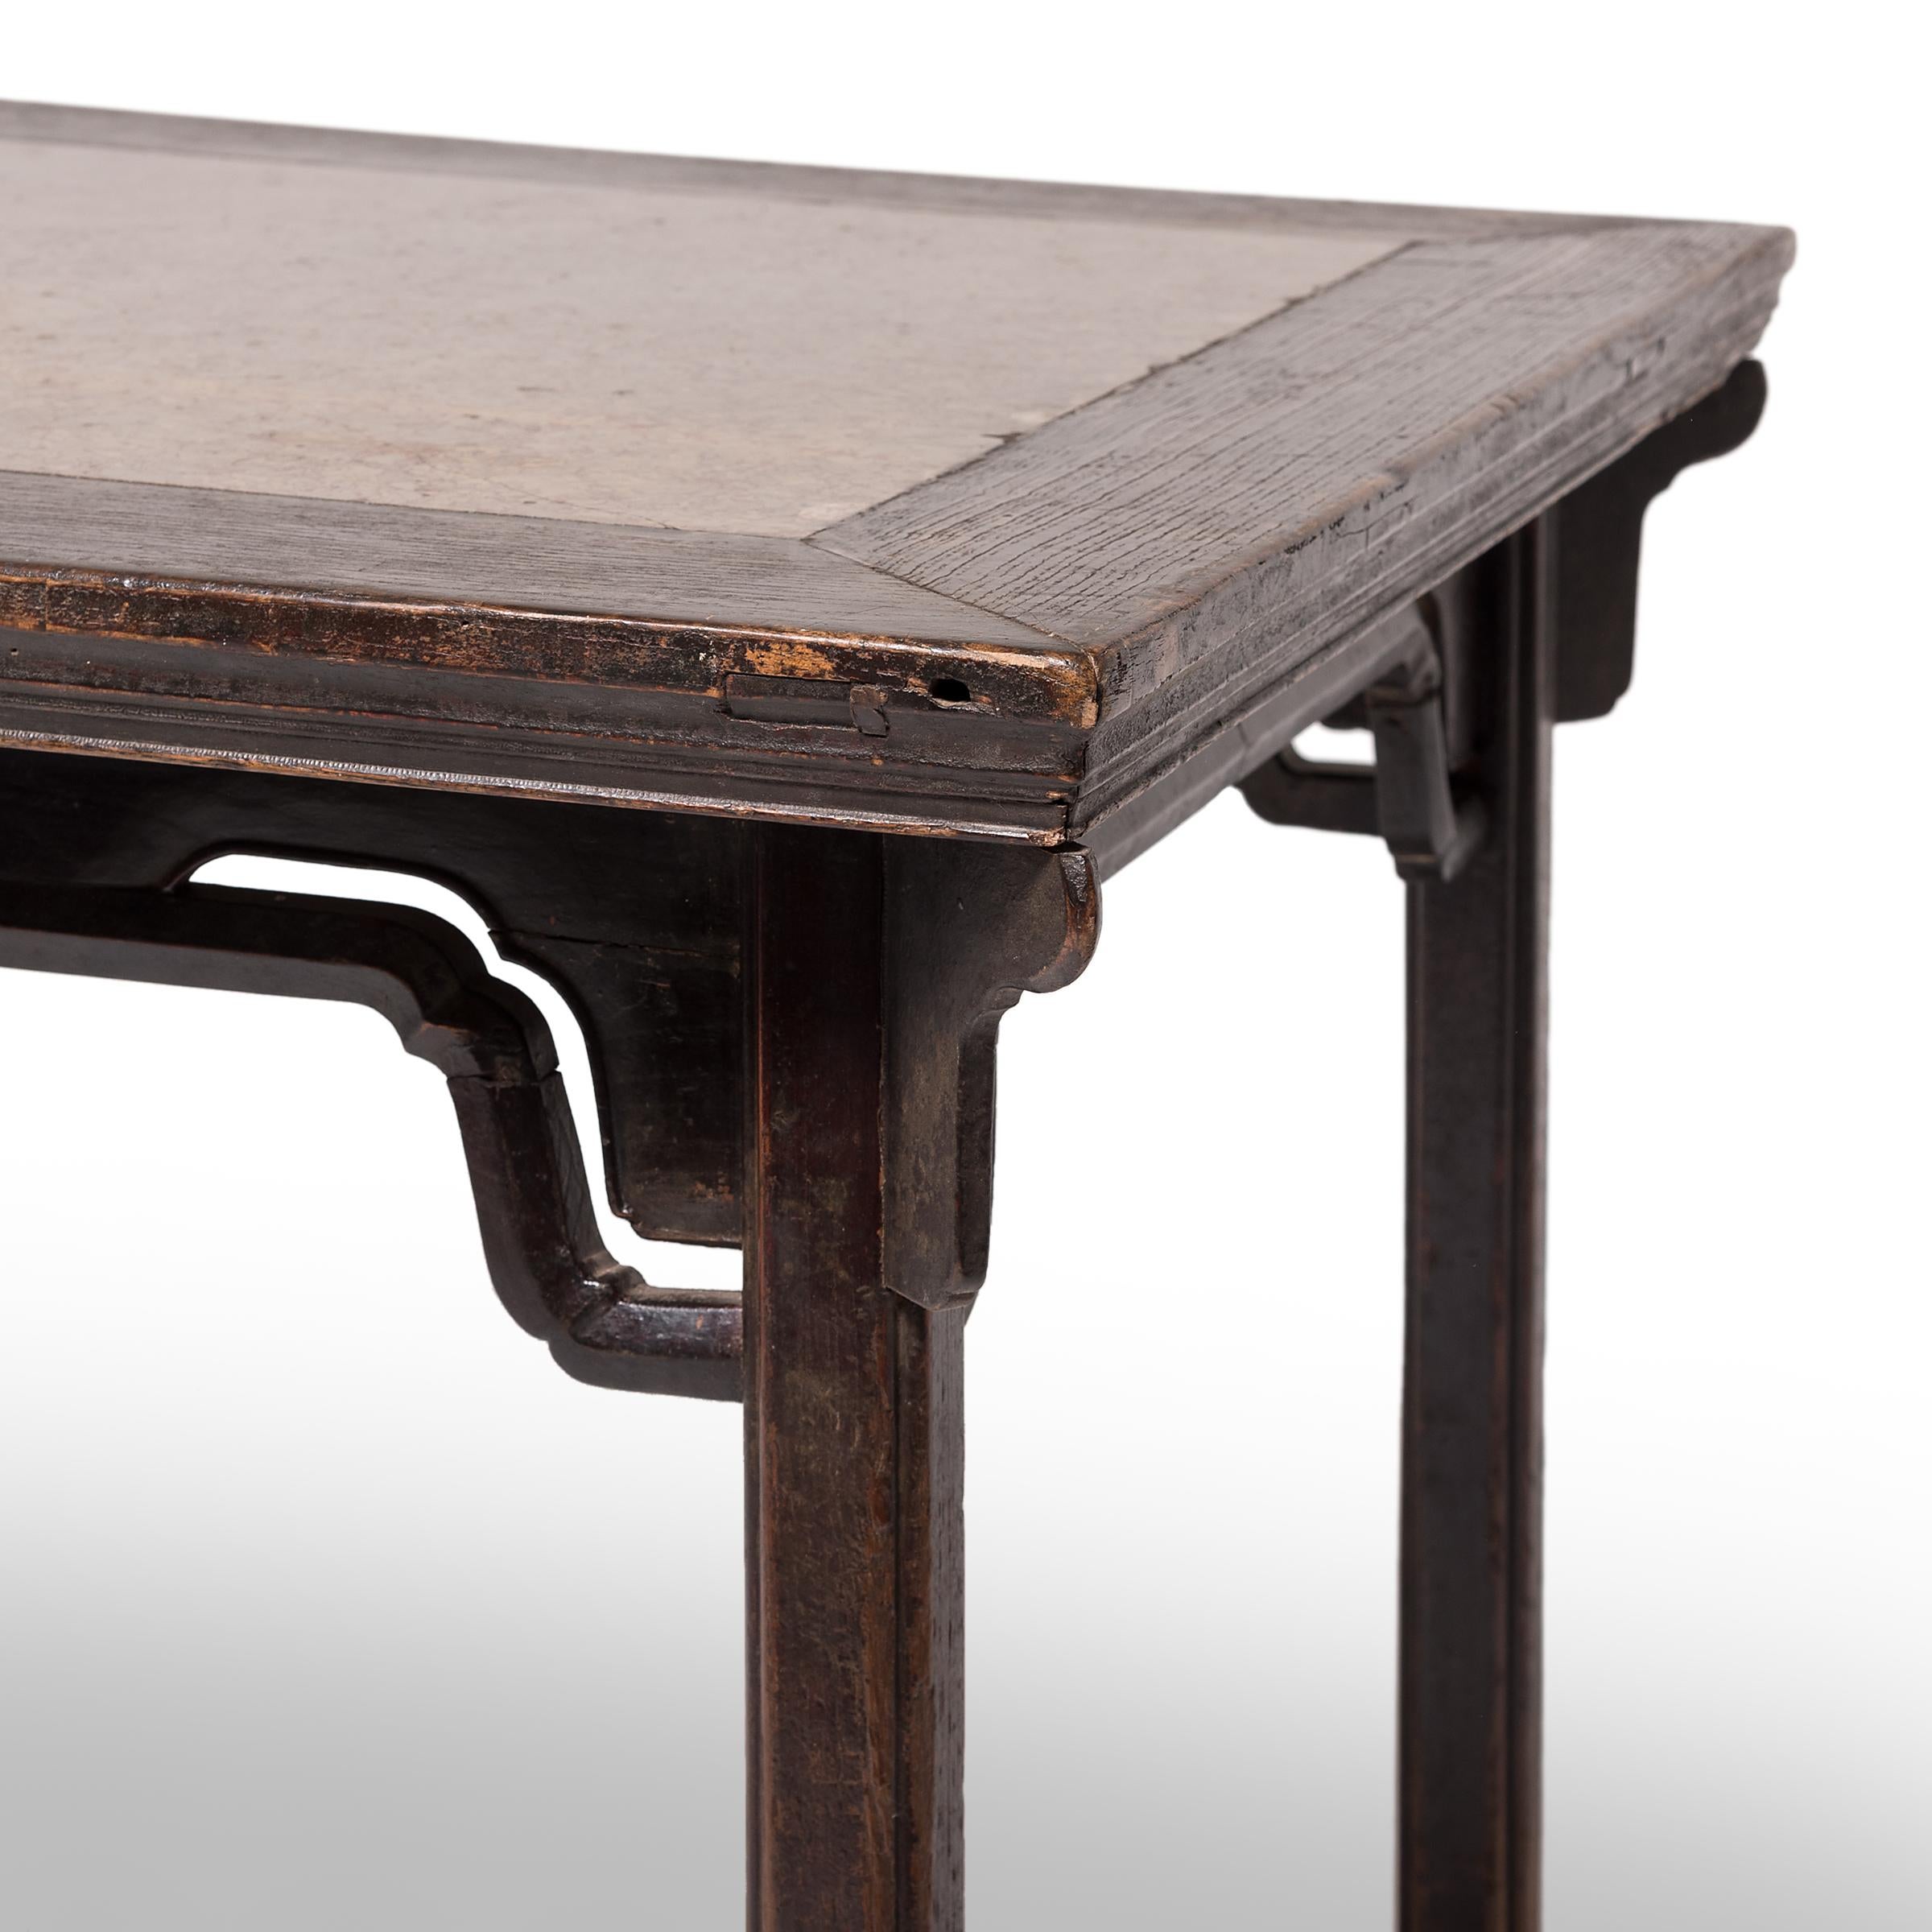 19th Century Eight Immortals Square Table with Puddingstone Inlay